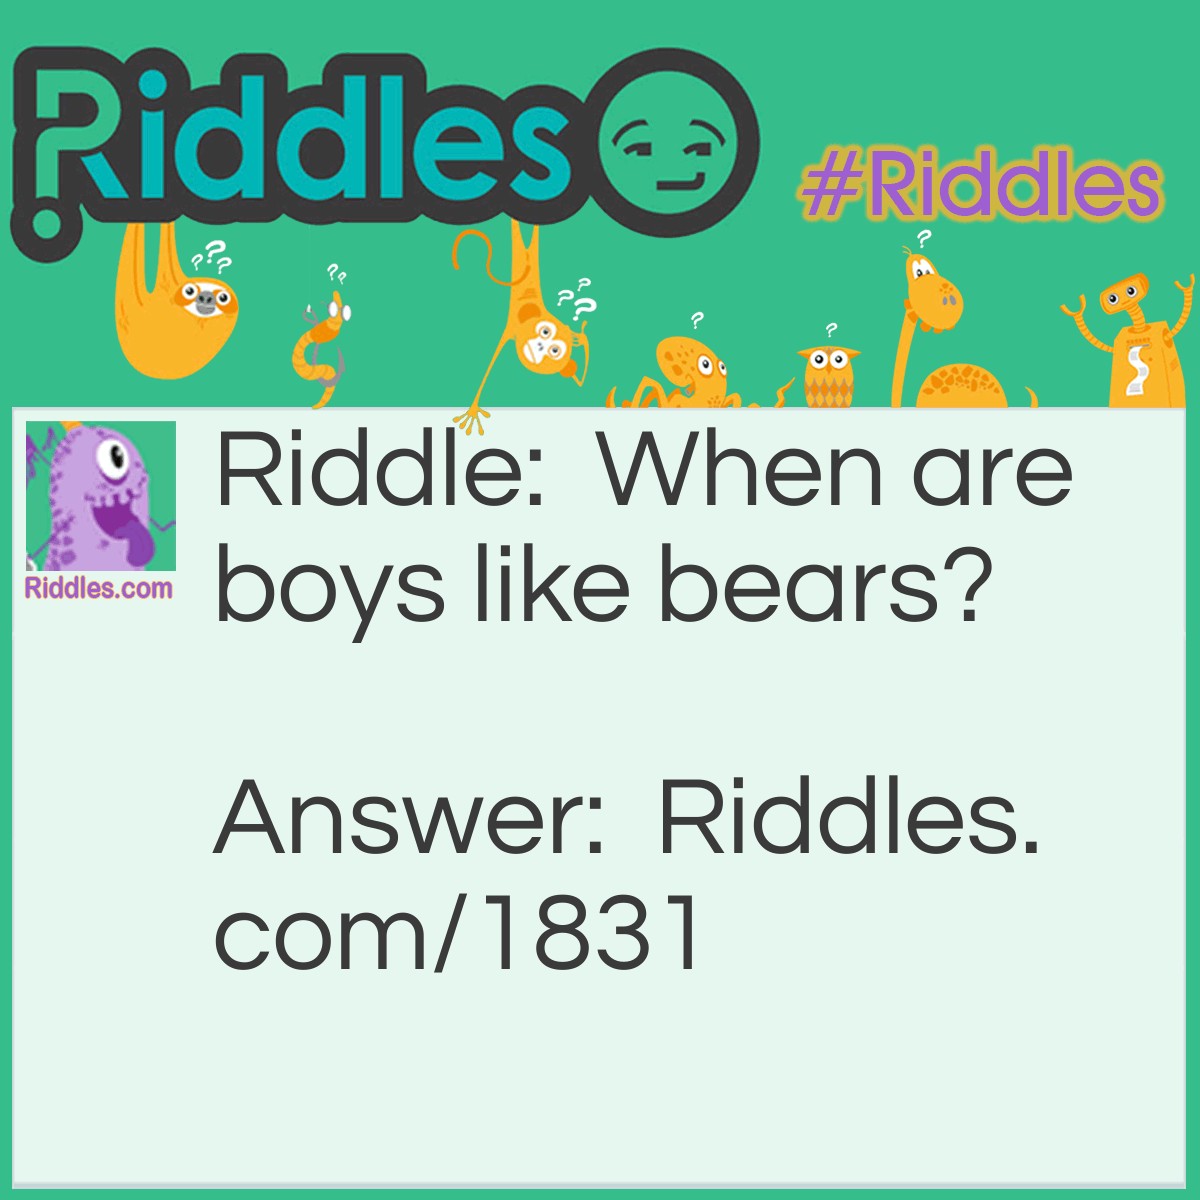 Riddle: When are boys like bears? Answer: When bare-footed.